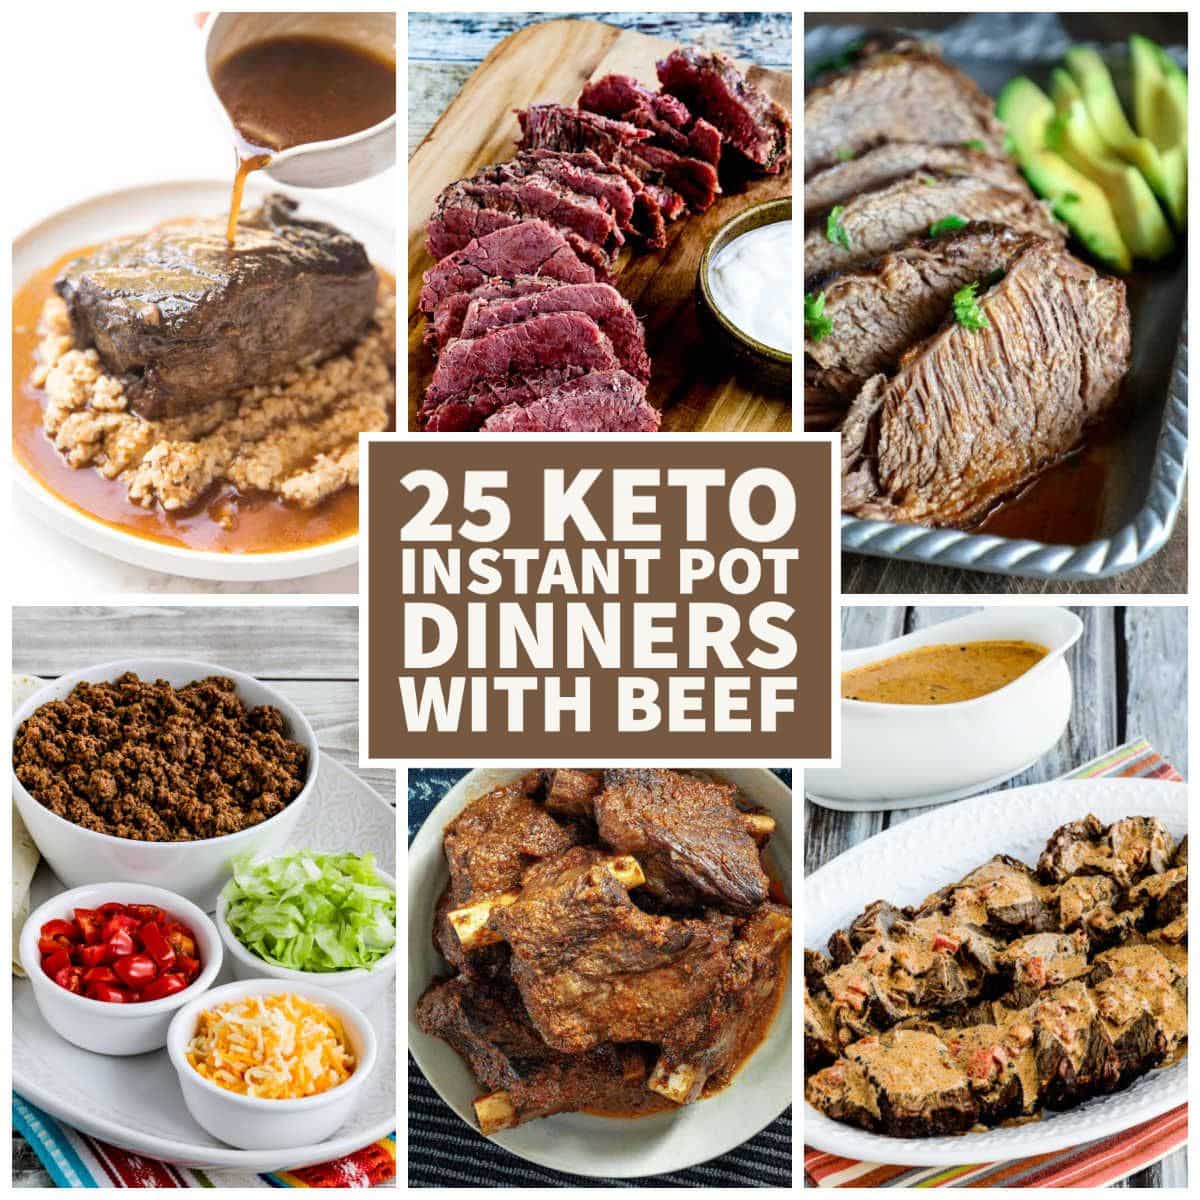 25 Keto Instant Pot Dinners with Beef collage of featured recipes